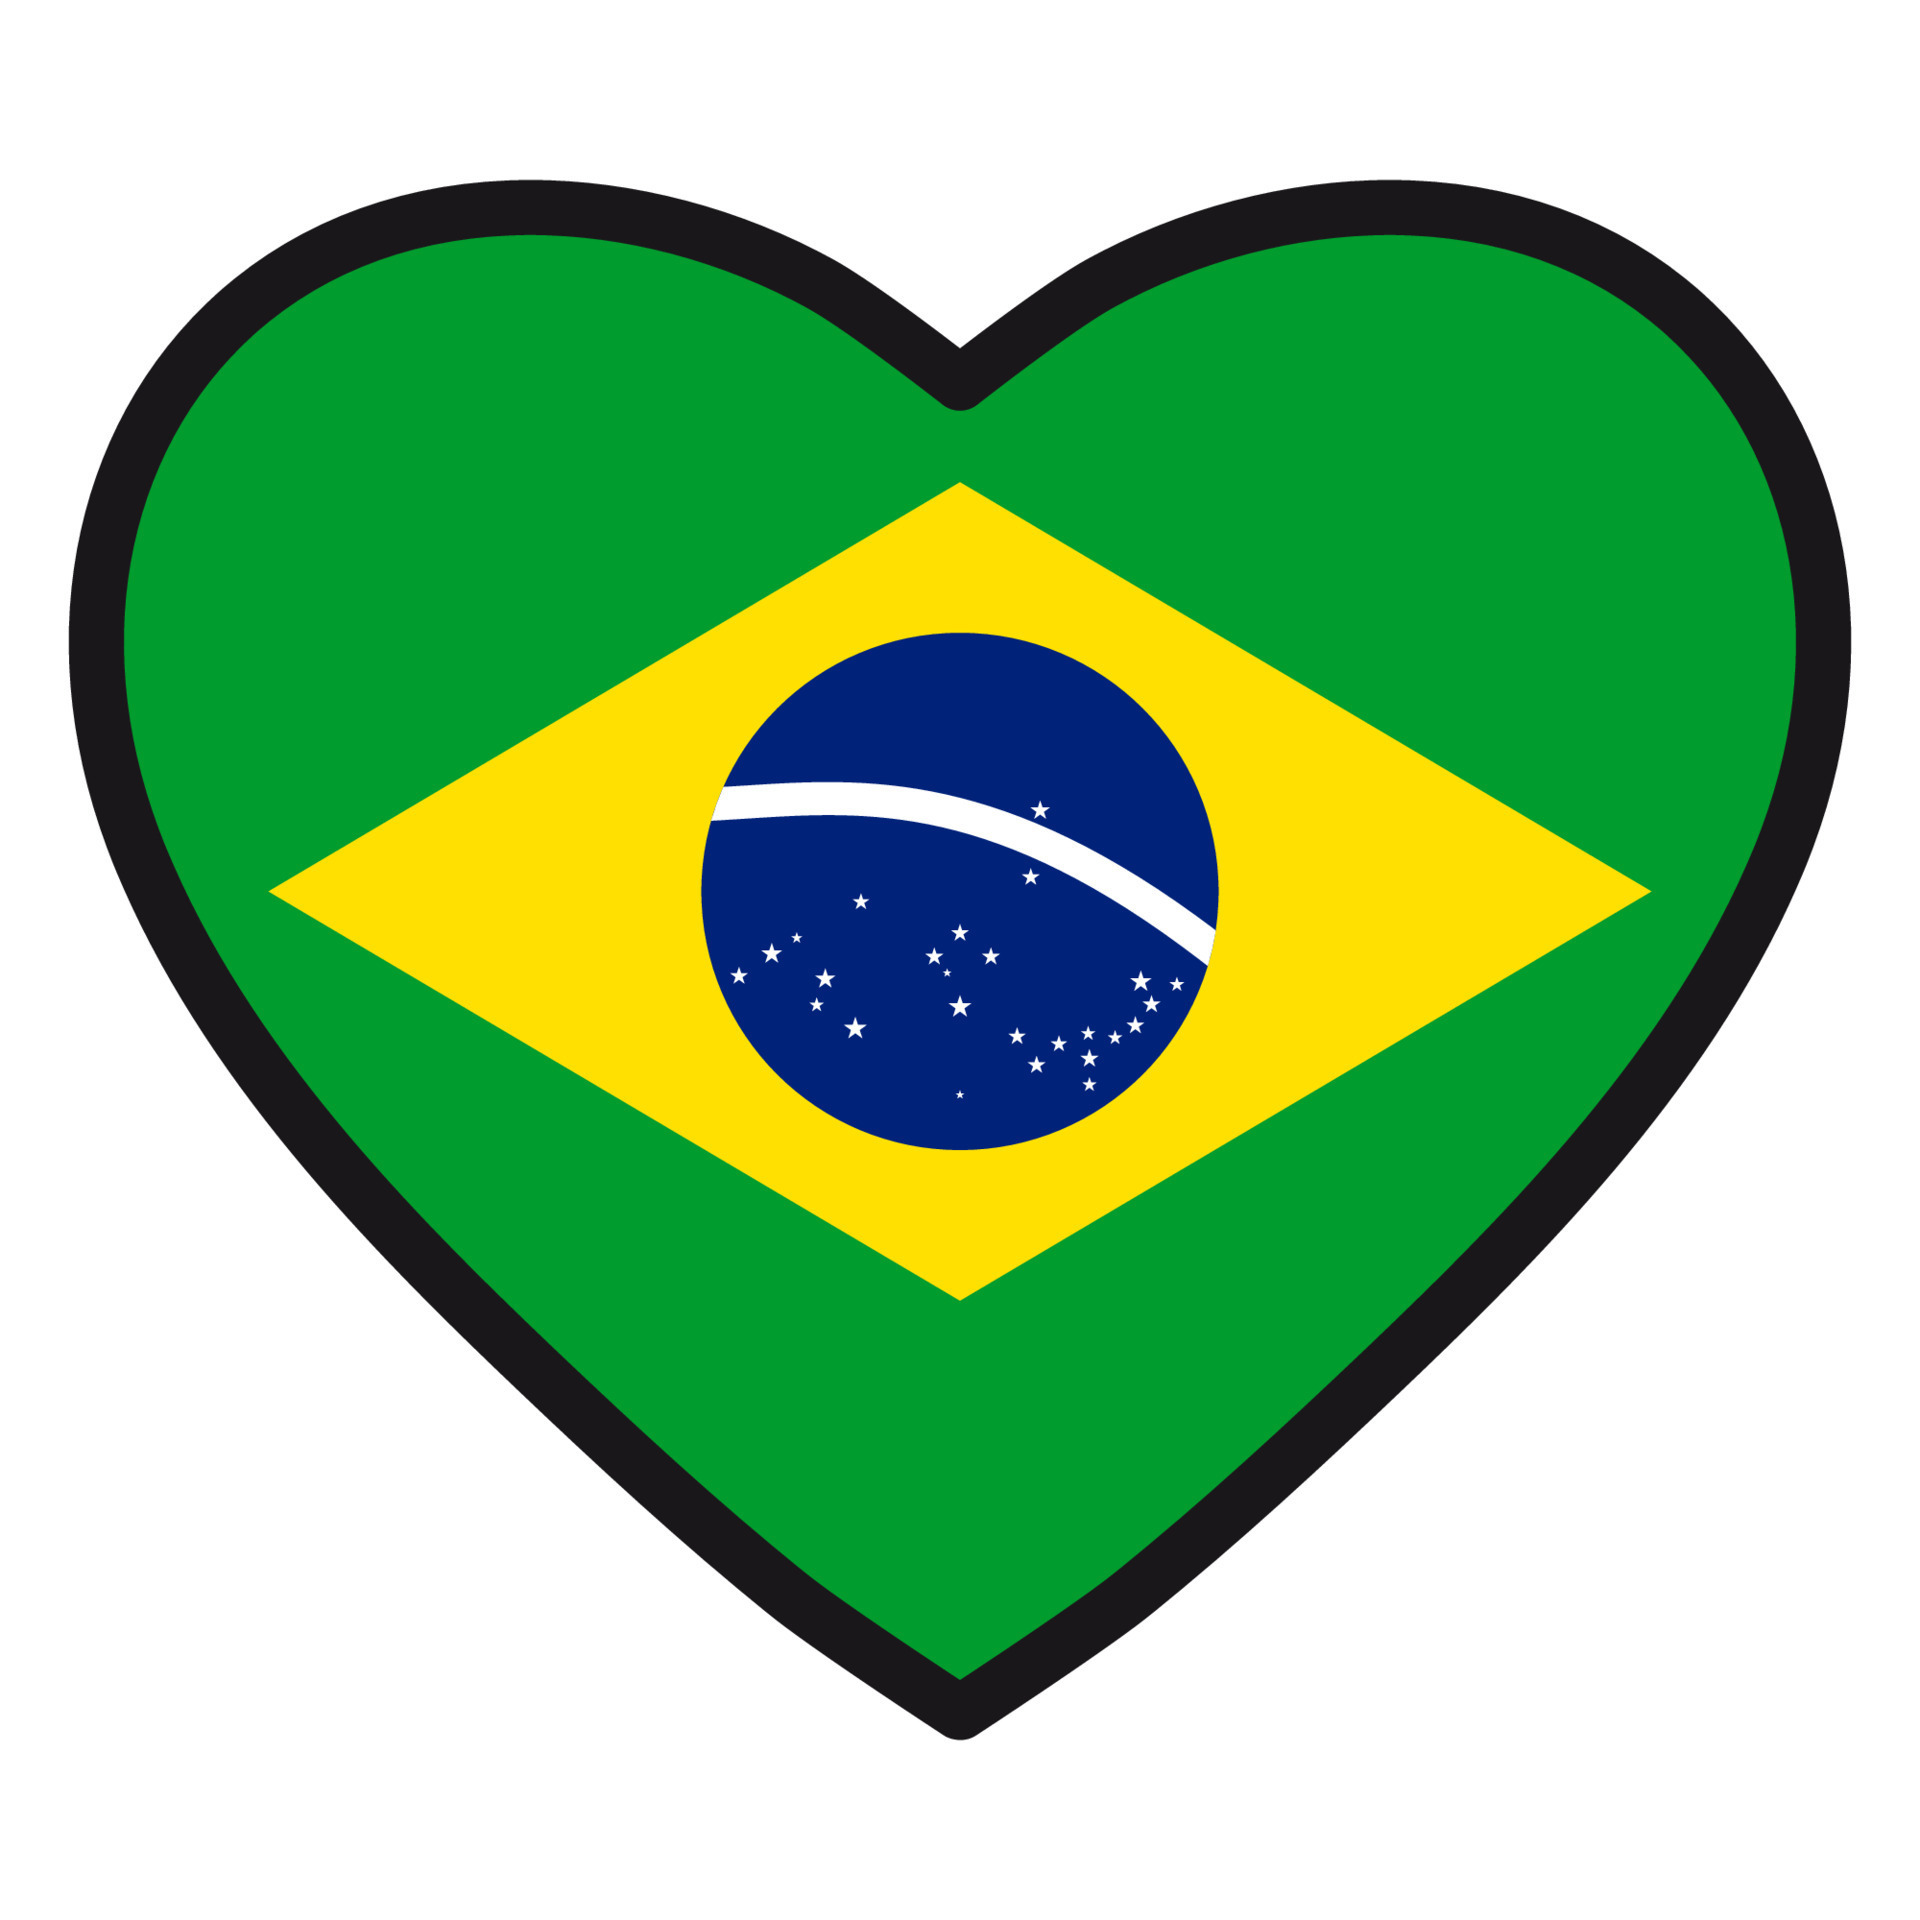 https://static.vecteezy.com/system/resources/previews/017/023/597/original/flag-of-brazil-in-the-shape-of-heart-with-contrasting-contour-symbol-of-love-for-his-country-patriotism-icon-for-independence-day-vector.jpg